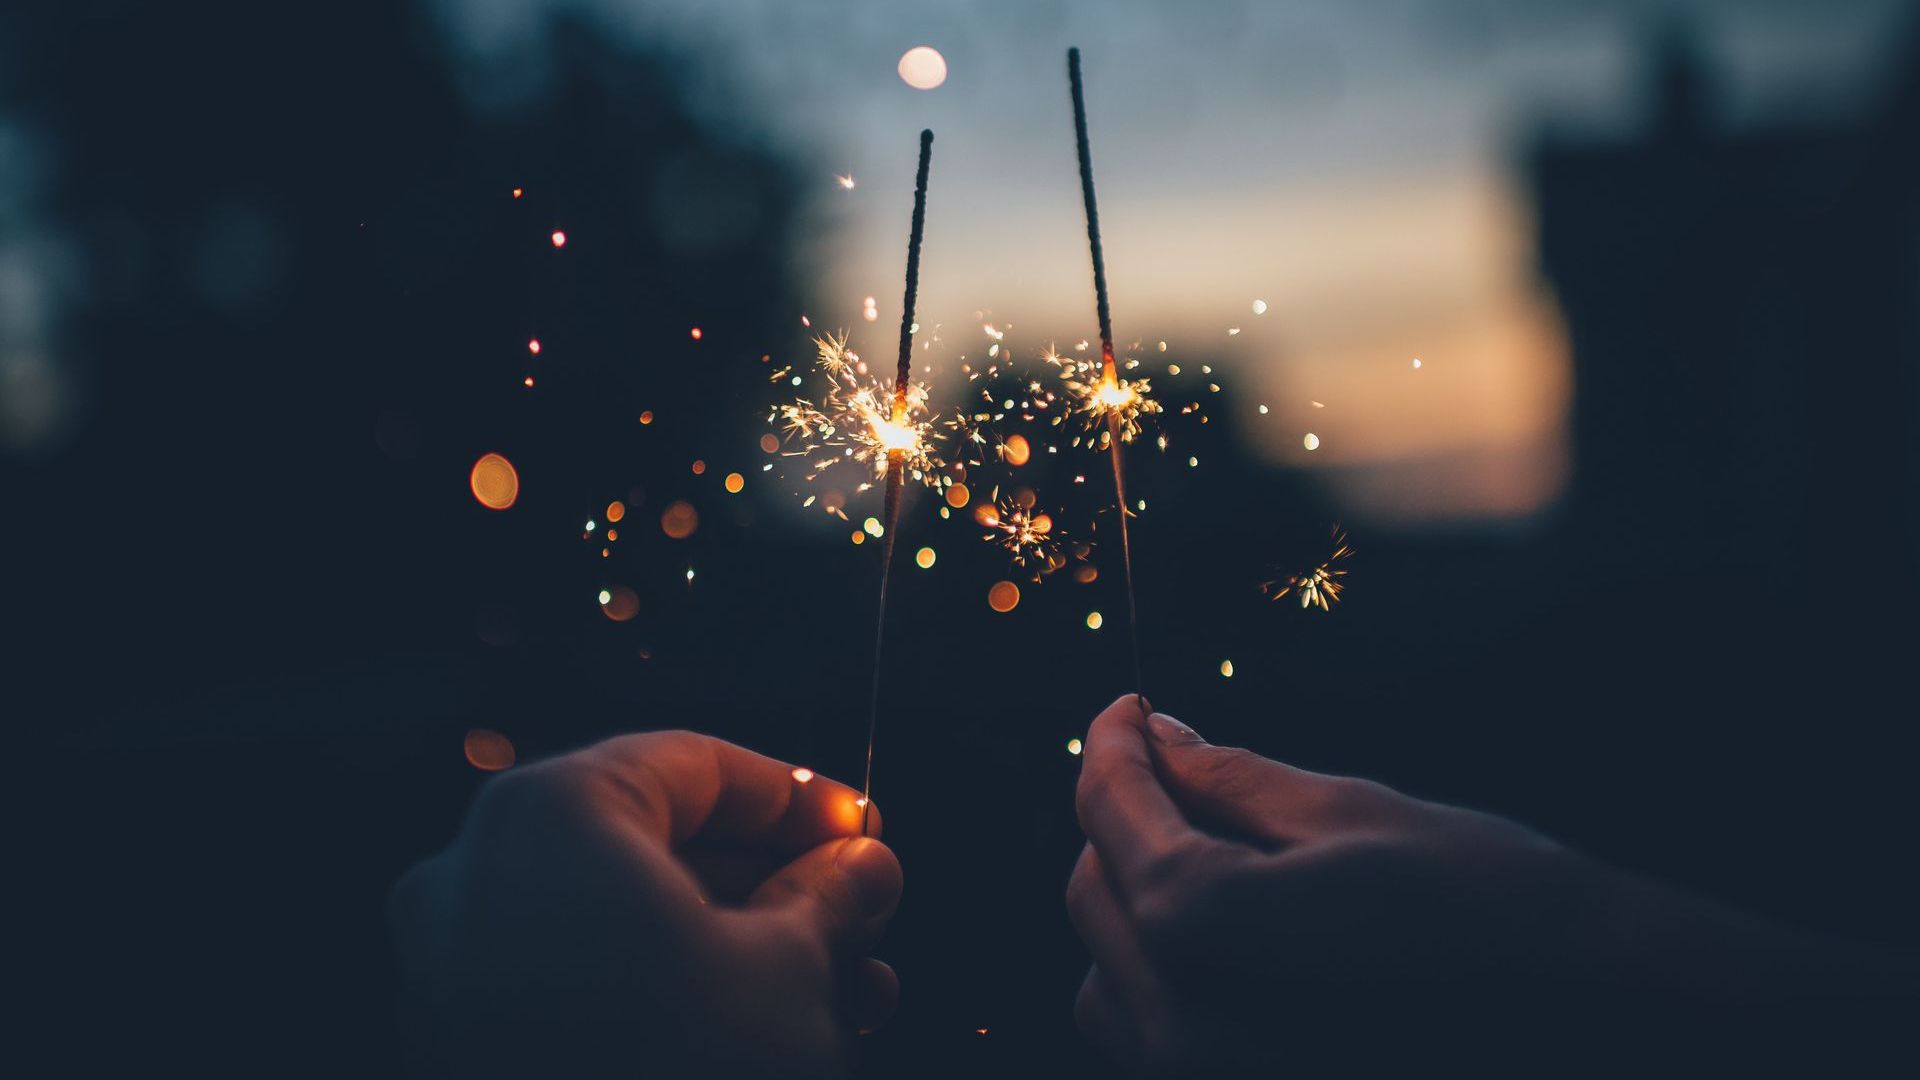 two hands holding up sparklers at twilight